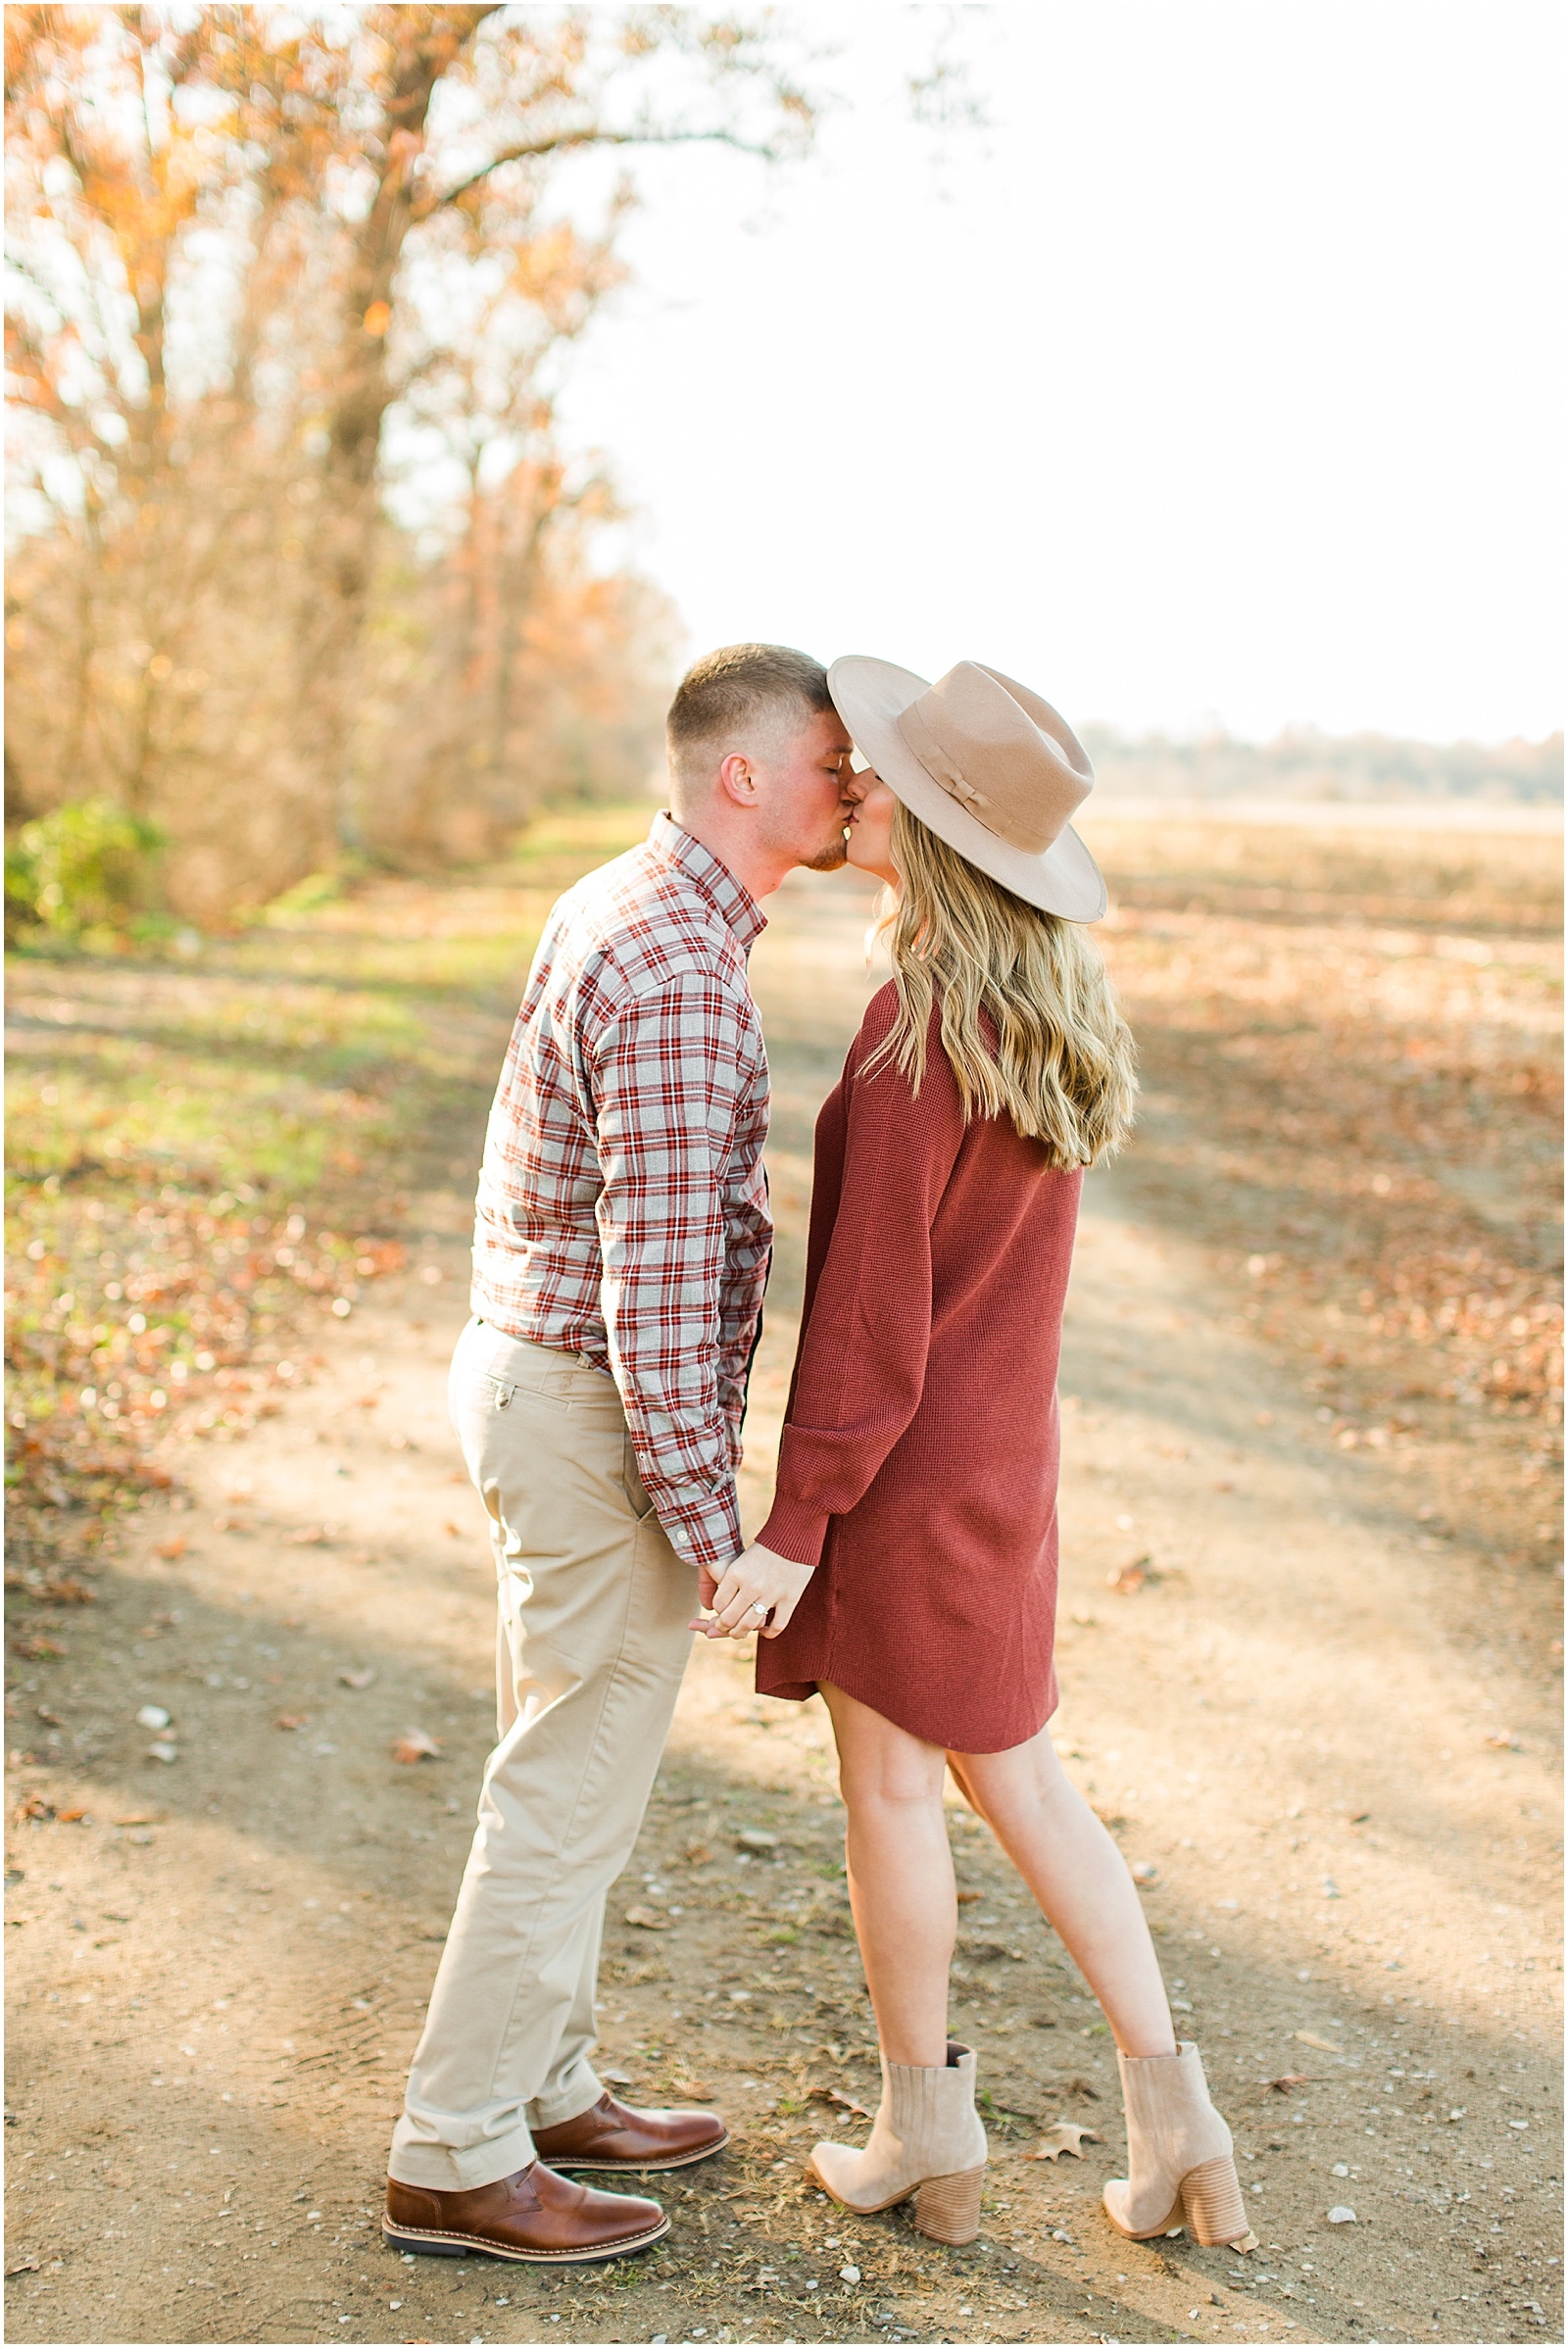 A Fall Southern Indiana Engagement Seesion | Cody and Hannah | Bret and Brandie Photography 007.jpg